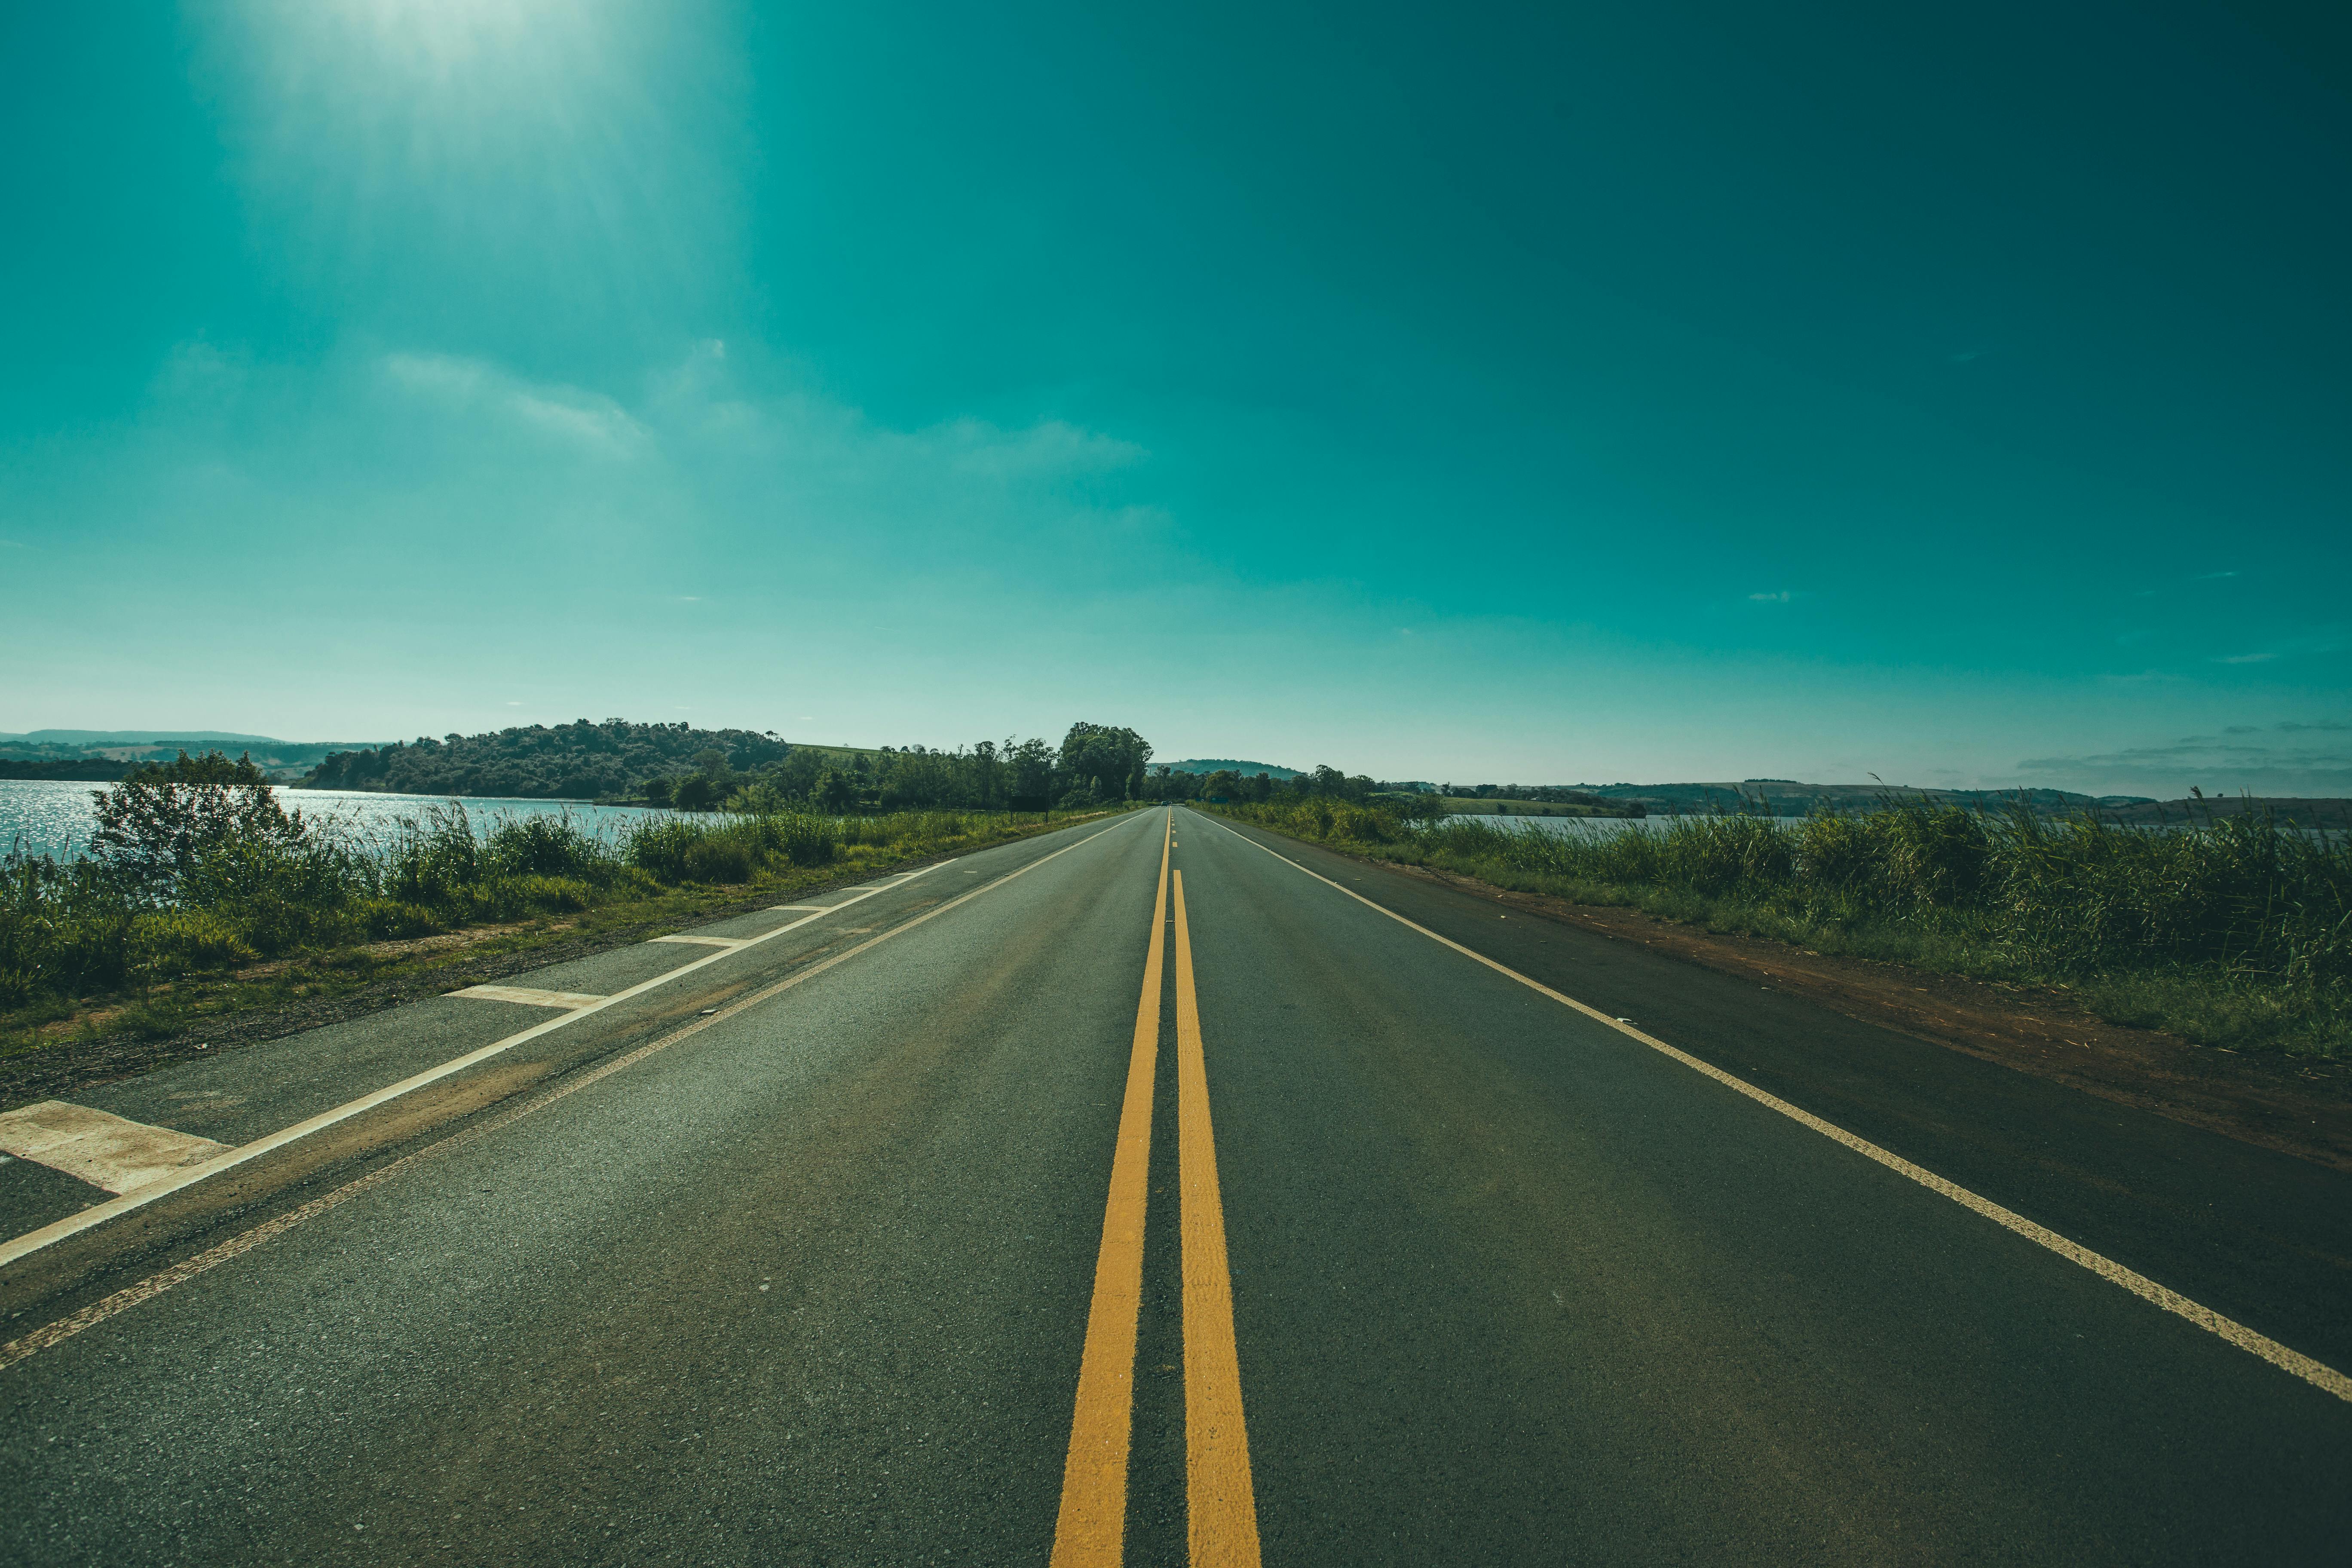 Road Images Pexels Free Stock Photos